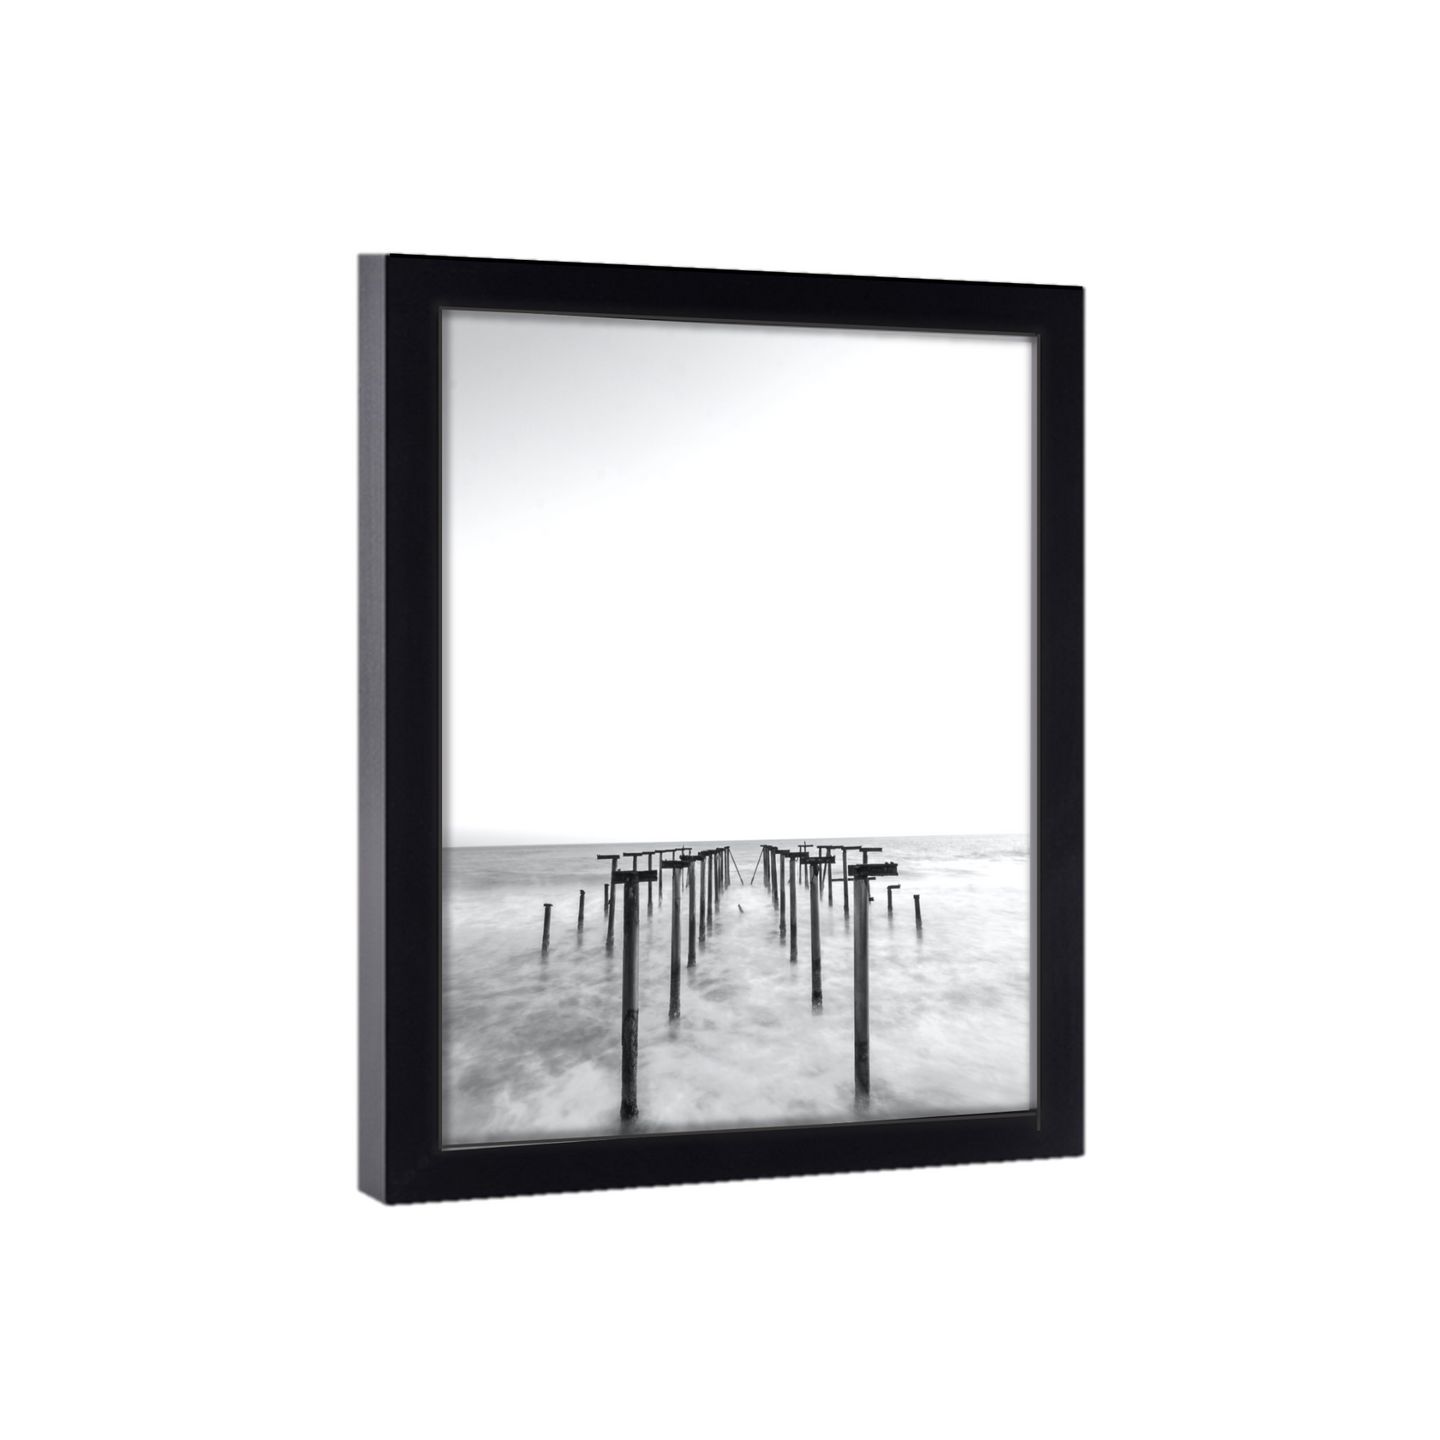 Gallery Wall 10x10 Picture Frame Black Wood 10x10 Frame photo Wall Decor  Poster Size